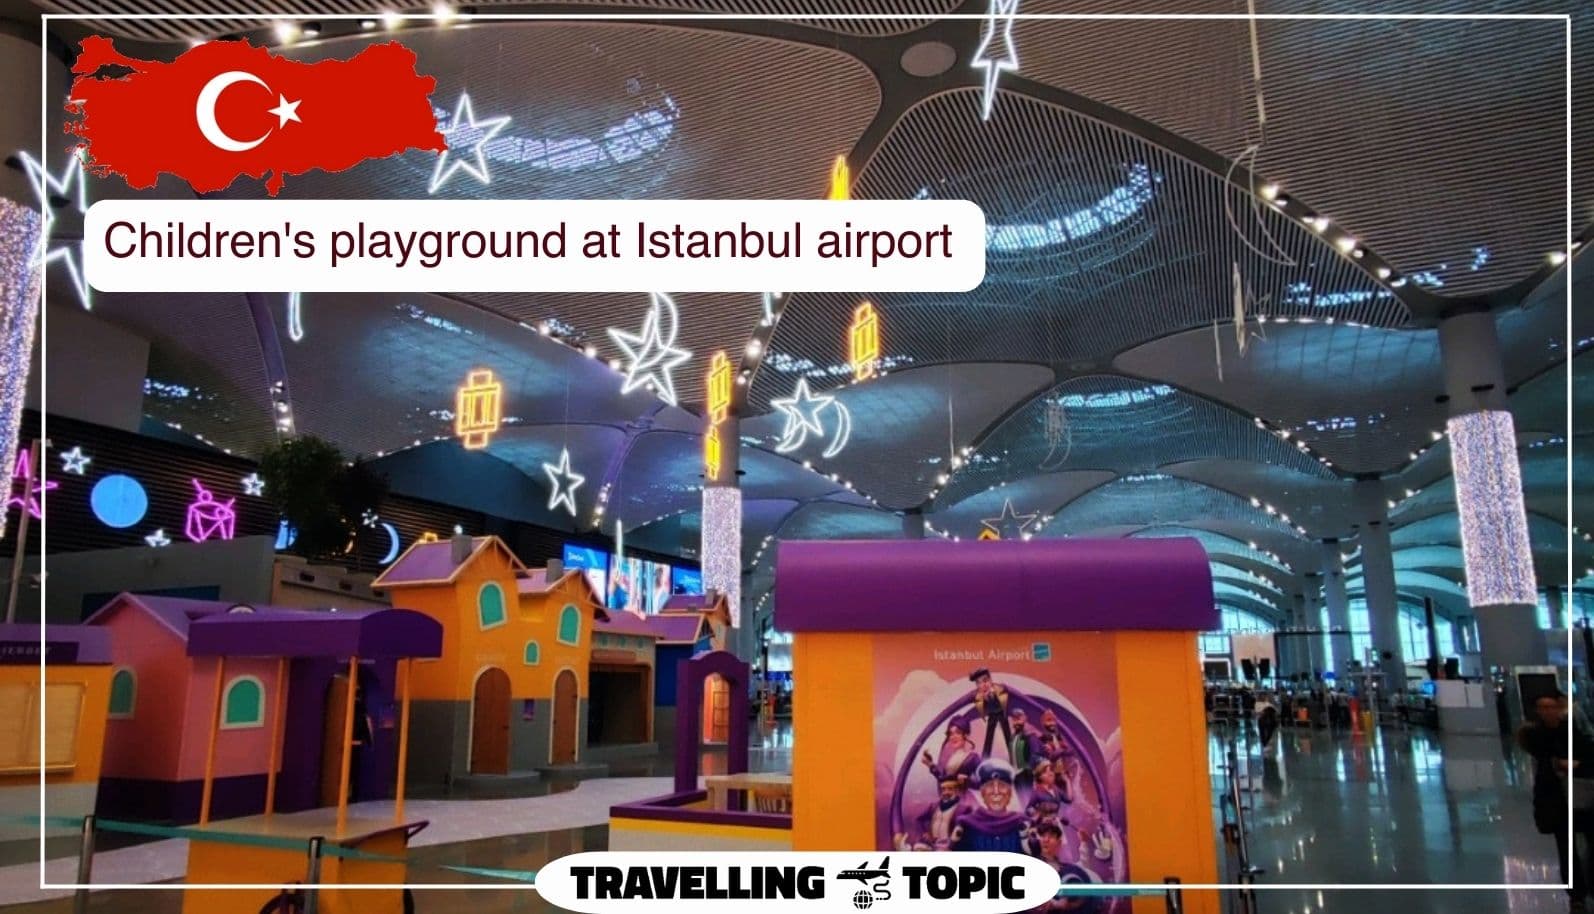 Children's playground at Istanbul airport | The best place for families with children